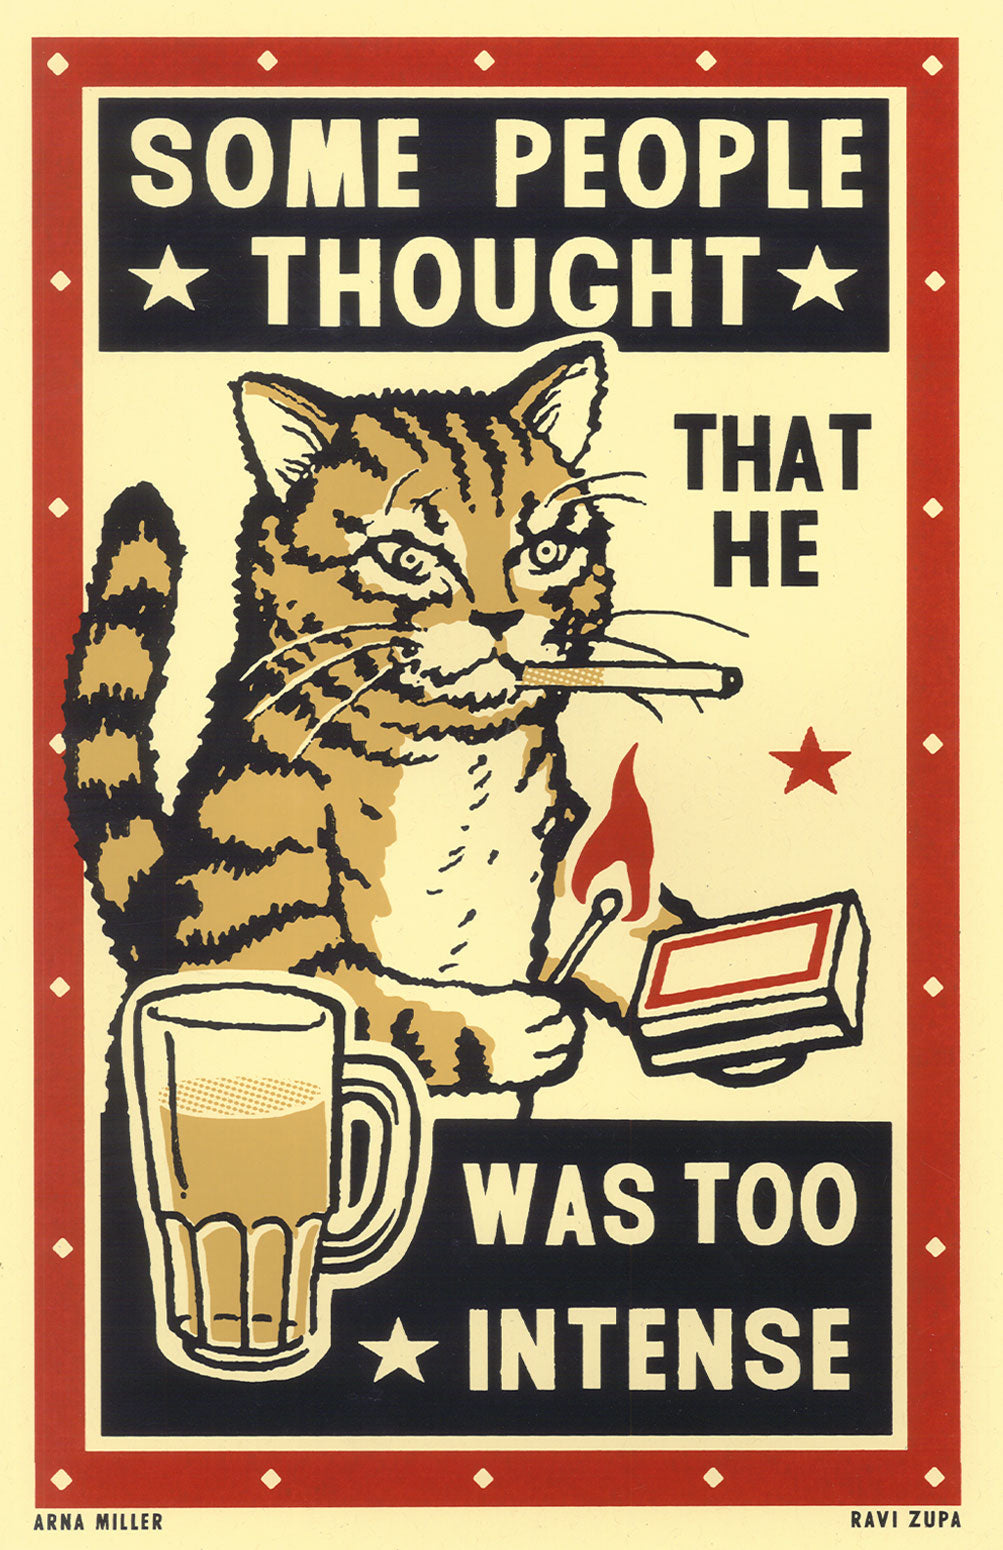 Drunk Cat Series Print - Some People Thought That He Was Too Intense - By Arna Miller and Ravi Zupa